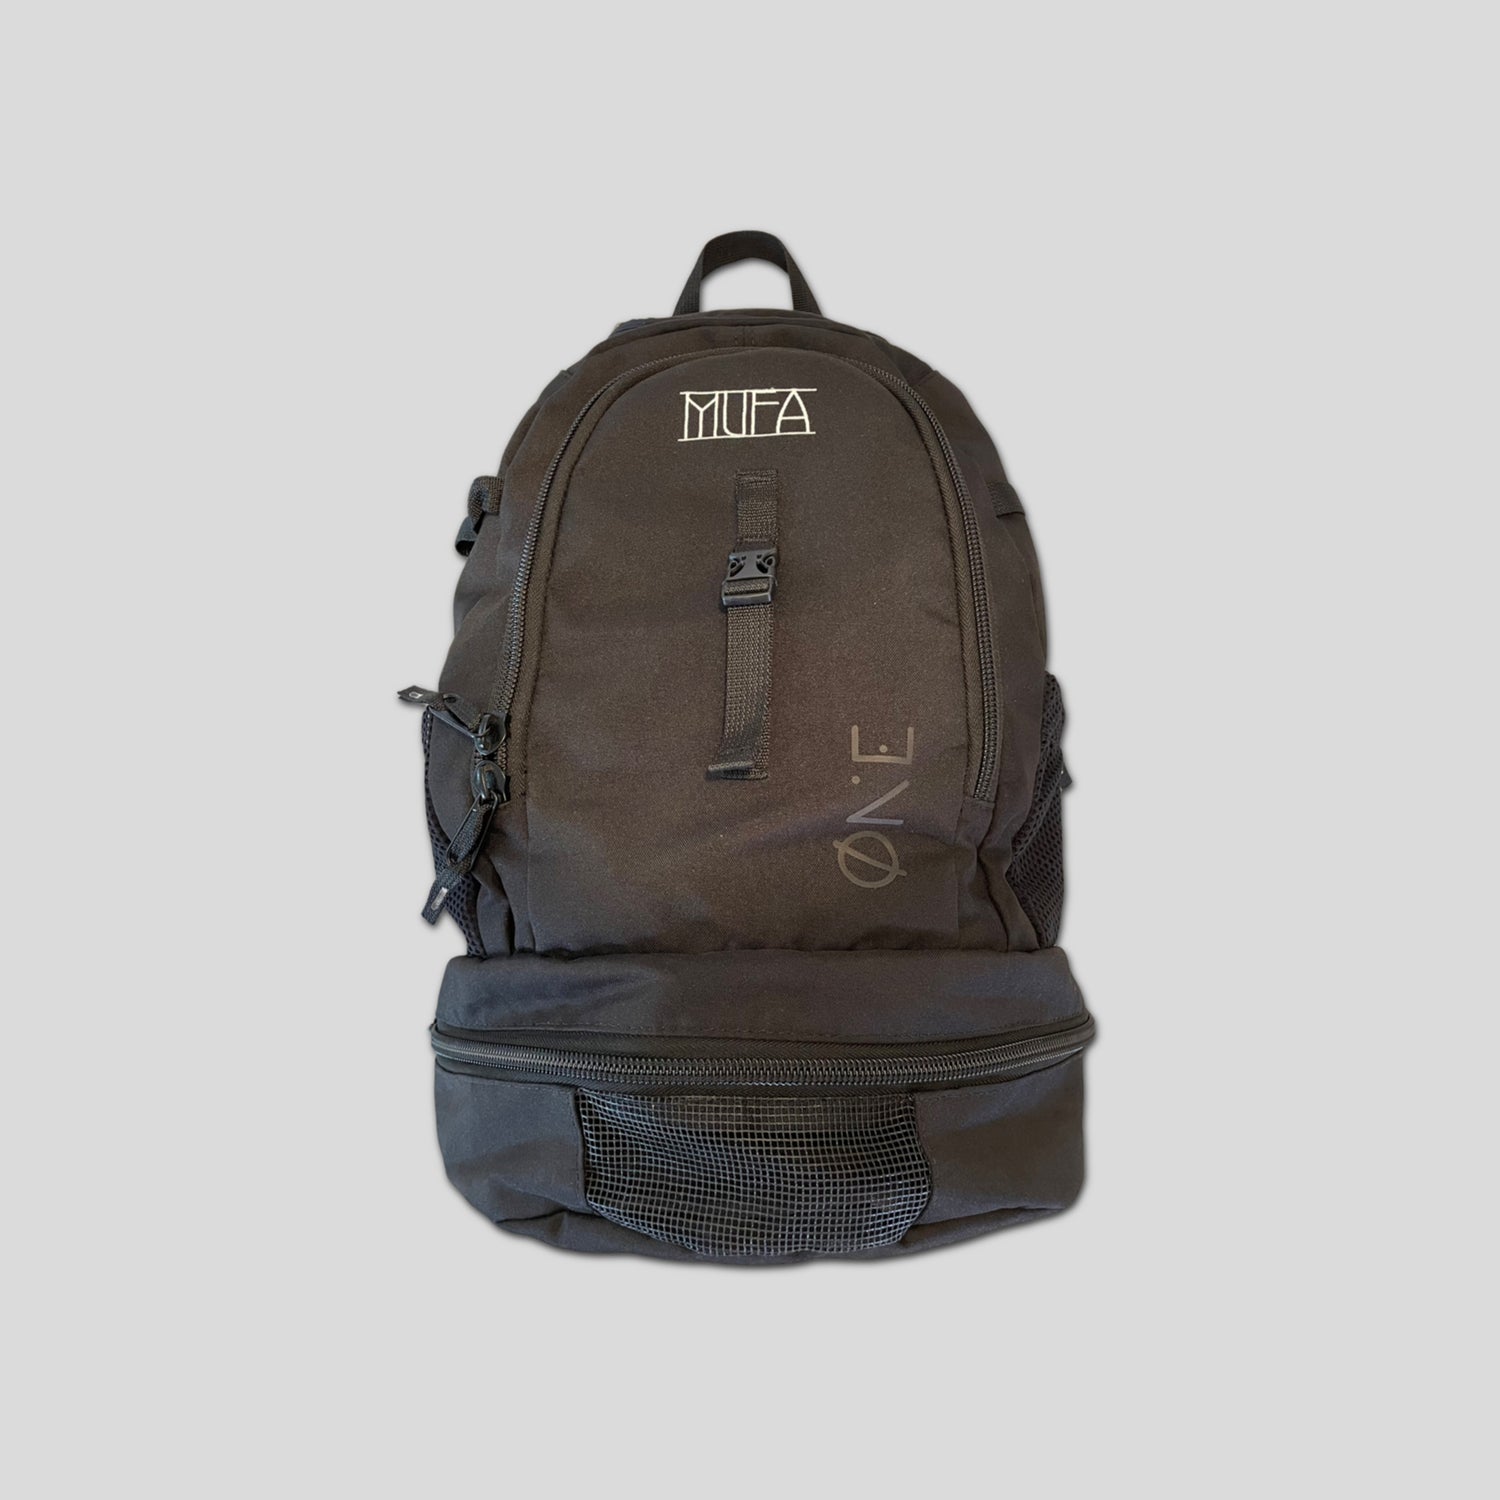 WAVE CHASER PACK - Mufa Brand